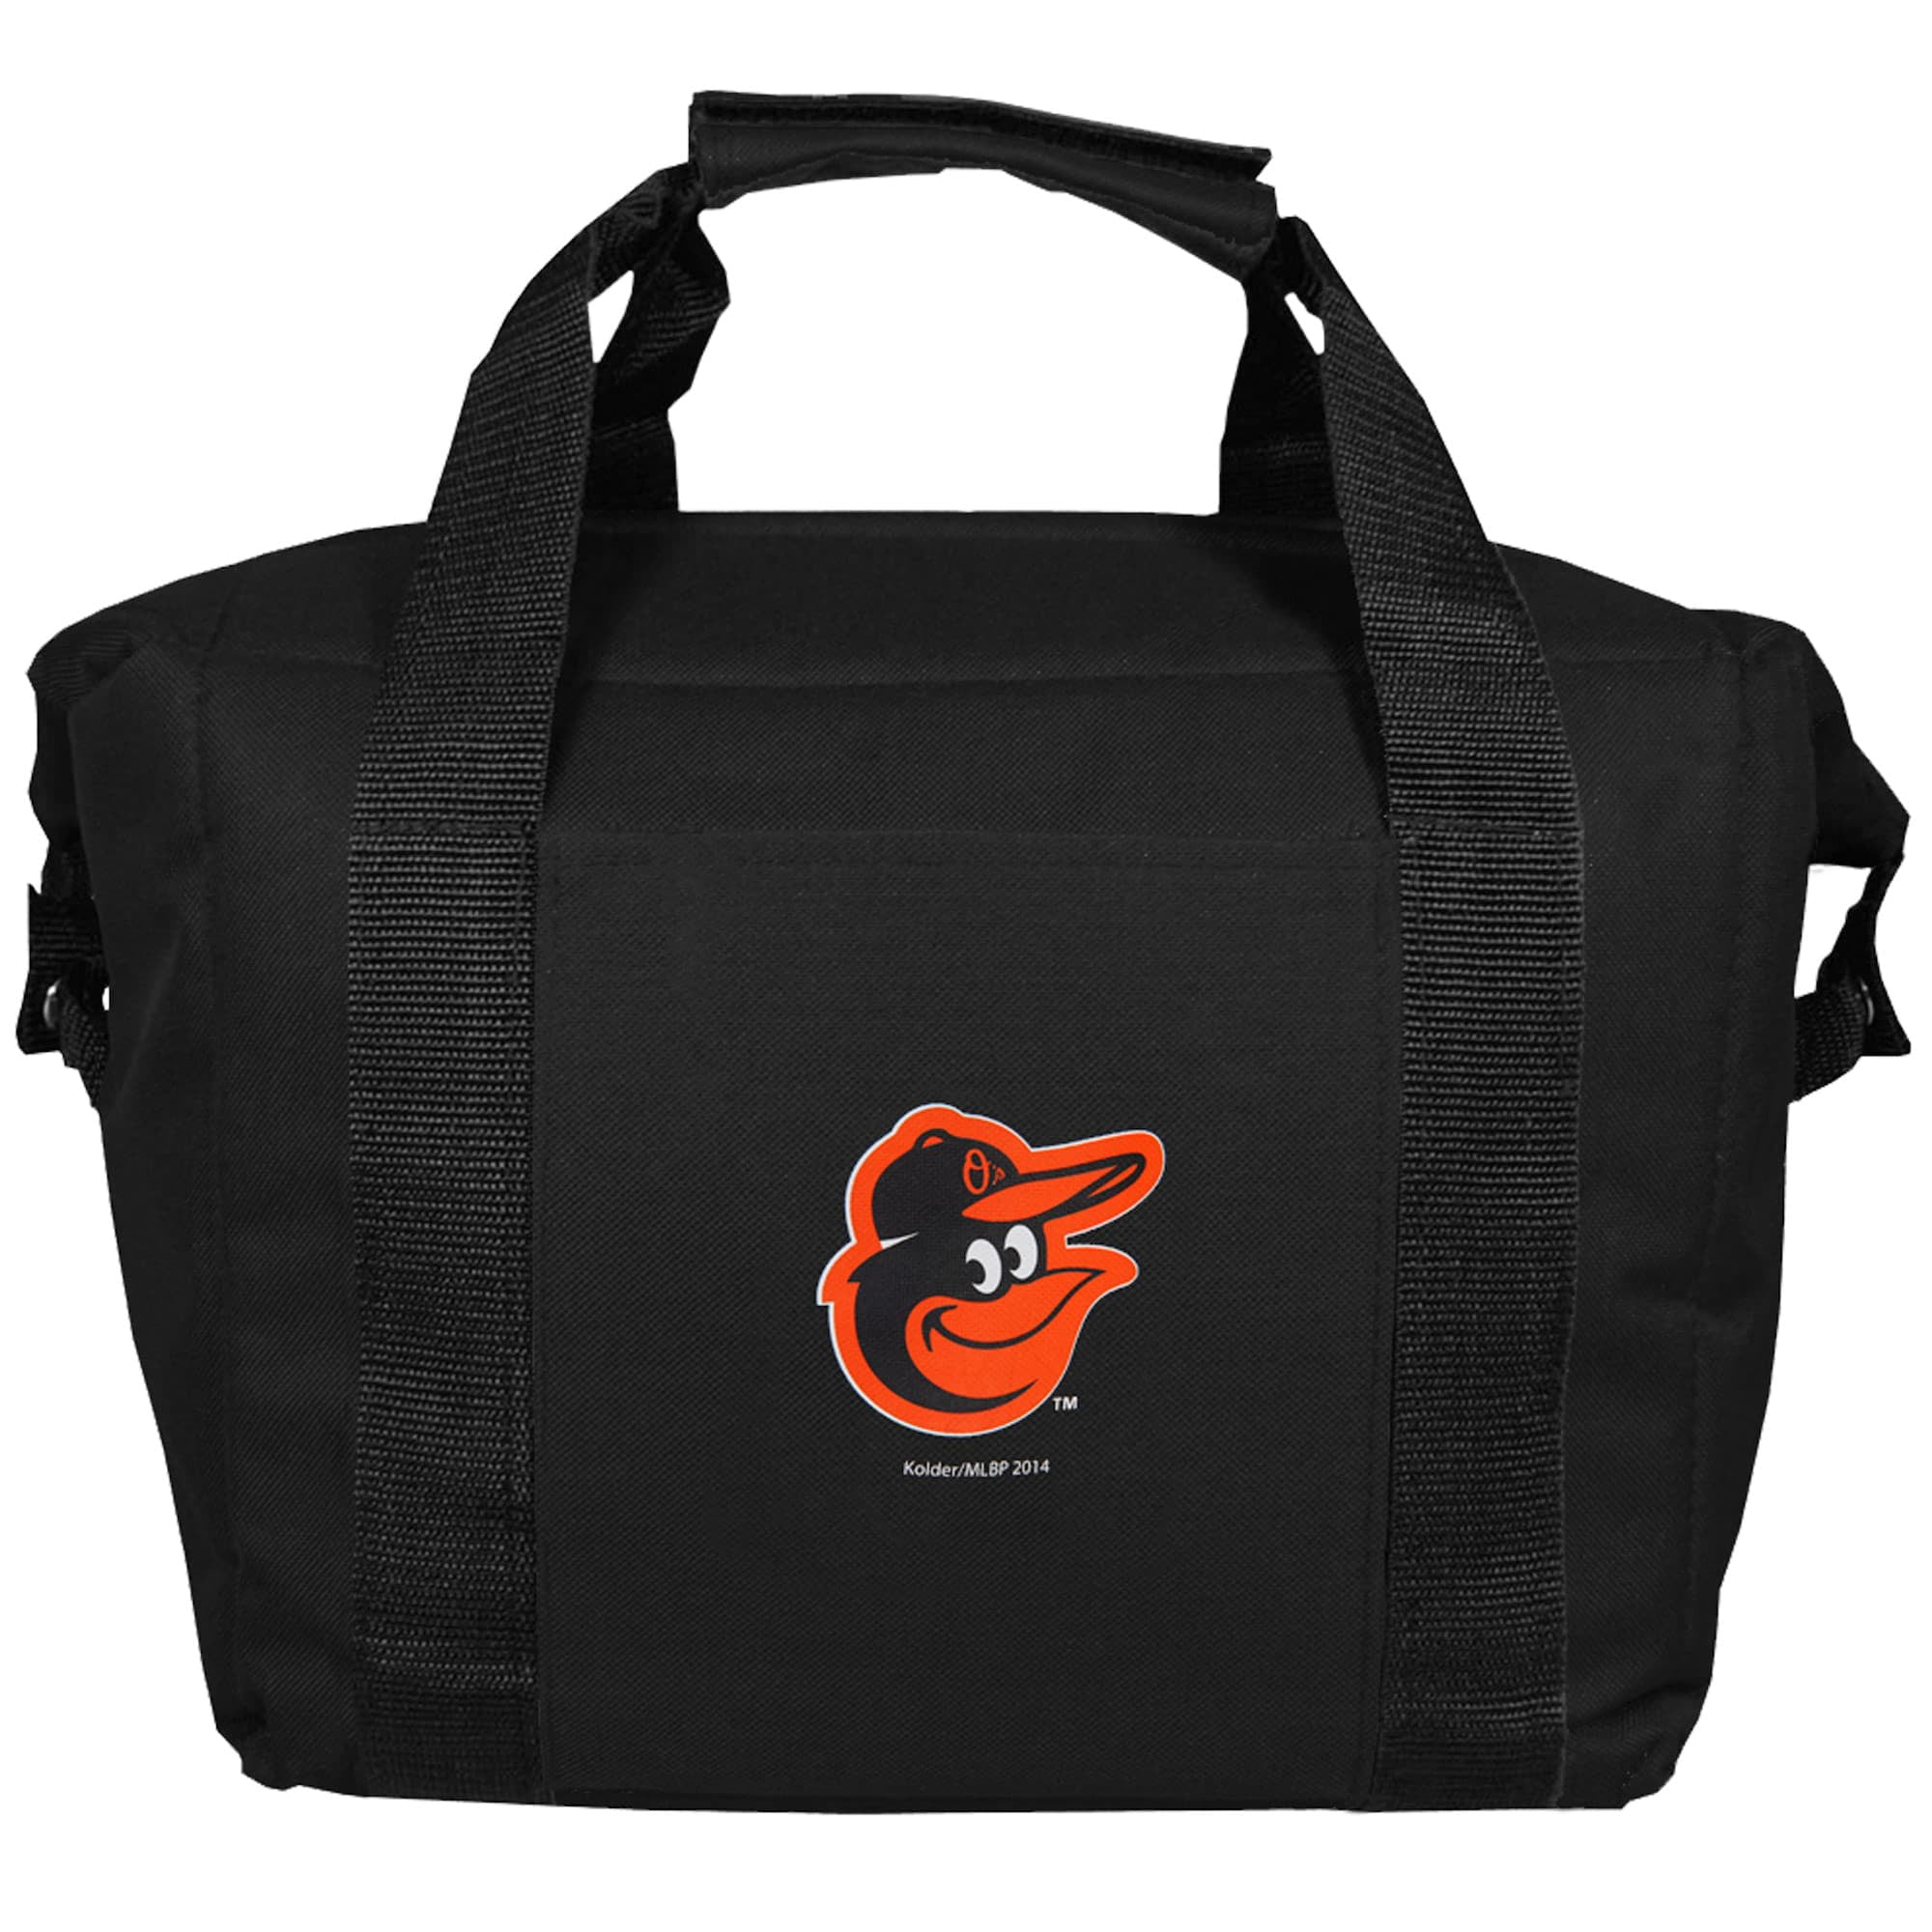 New NCAA College 2014 Team Color Logo 6 Pack Lunch Tote Bag Cooler Pick Team 